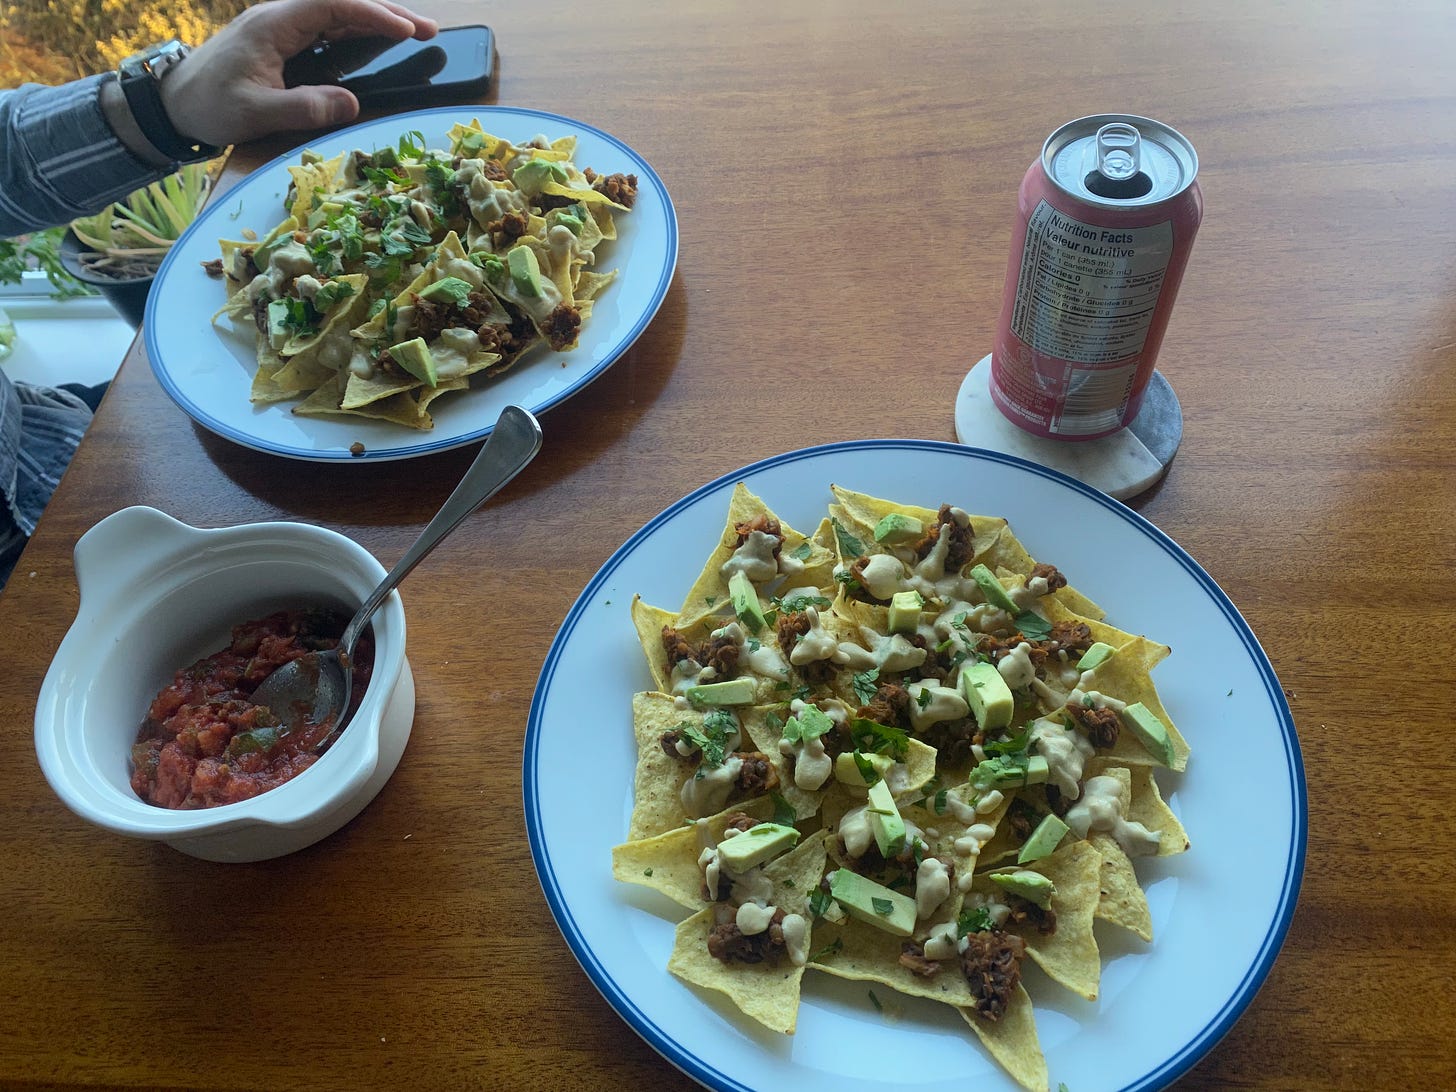 Two plates of vegan nachos as described above: lentil meat, queso, avocado, and cilantro on top. There's a white french onion soup bowl between them full of chunky red salsa with a spoon in it. Jeff's hand is just visible at the top left of frame, and a pink can of sparkling water is on the coaster next to the plate in the foreground.